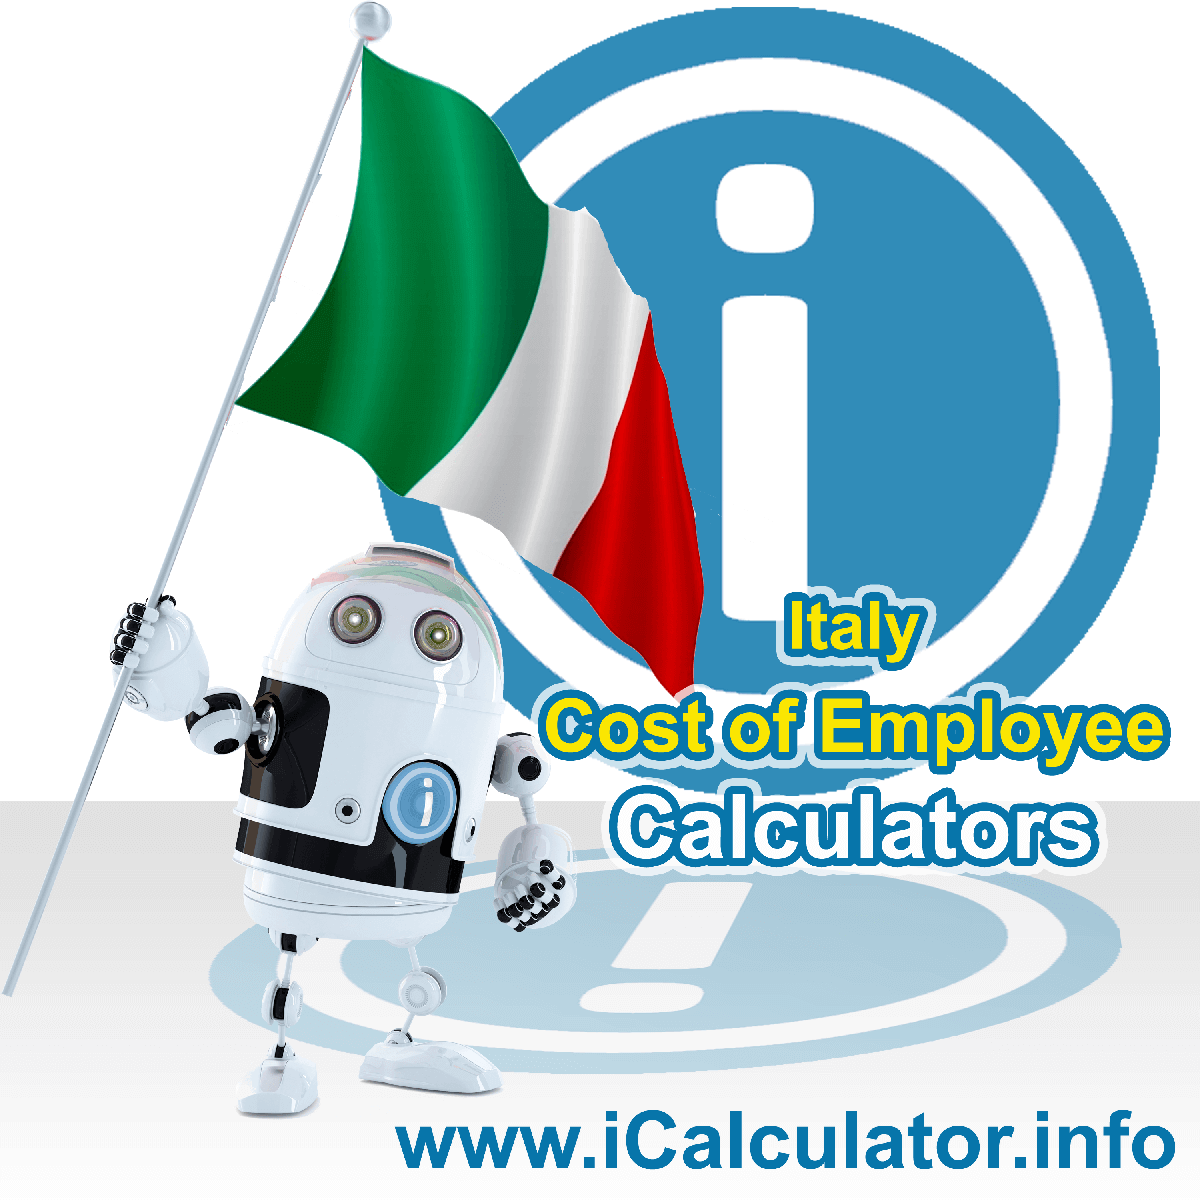 Italy Payroll Calculator. This image shows a new employer in Italy looking at payroll and human resource services in Italy as they want to hire an employee in Italy but are not sure of the employment costs. So, they make use of the Italy payroll calculator to understand their employment cost in Italy in 2019